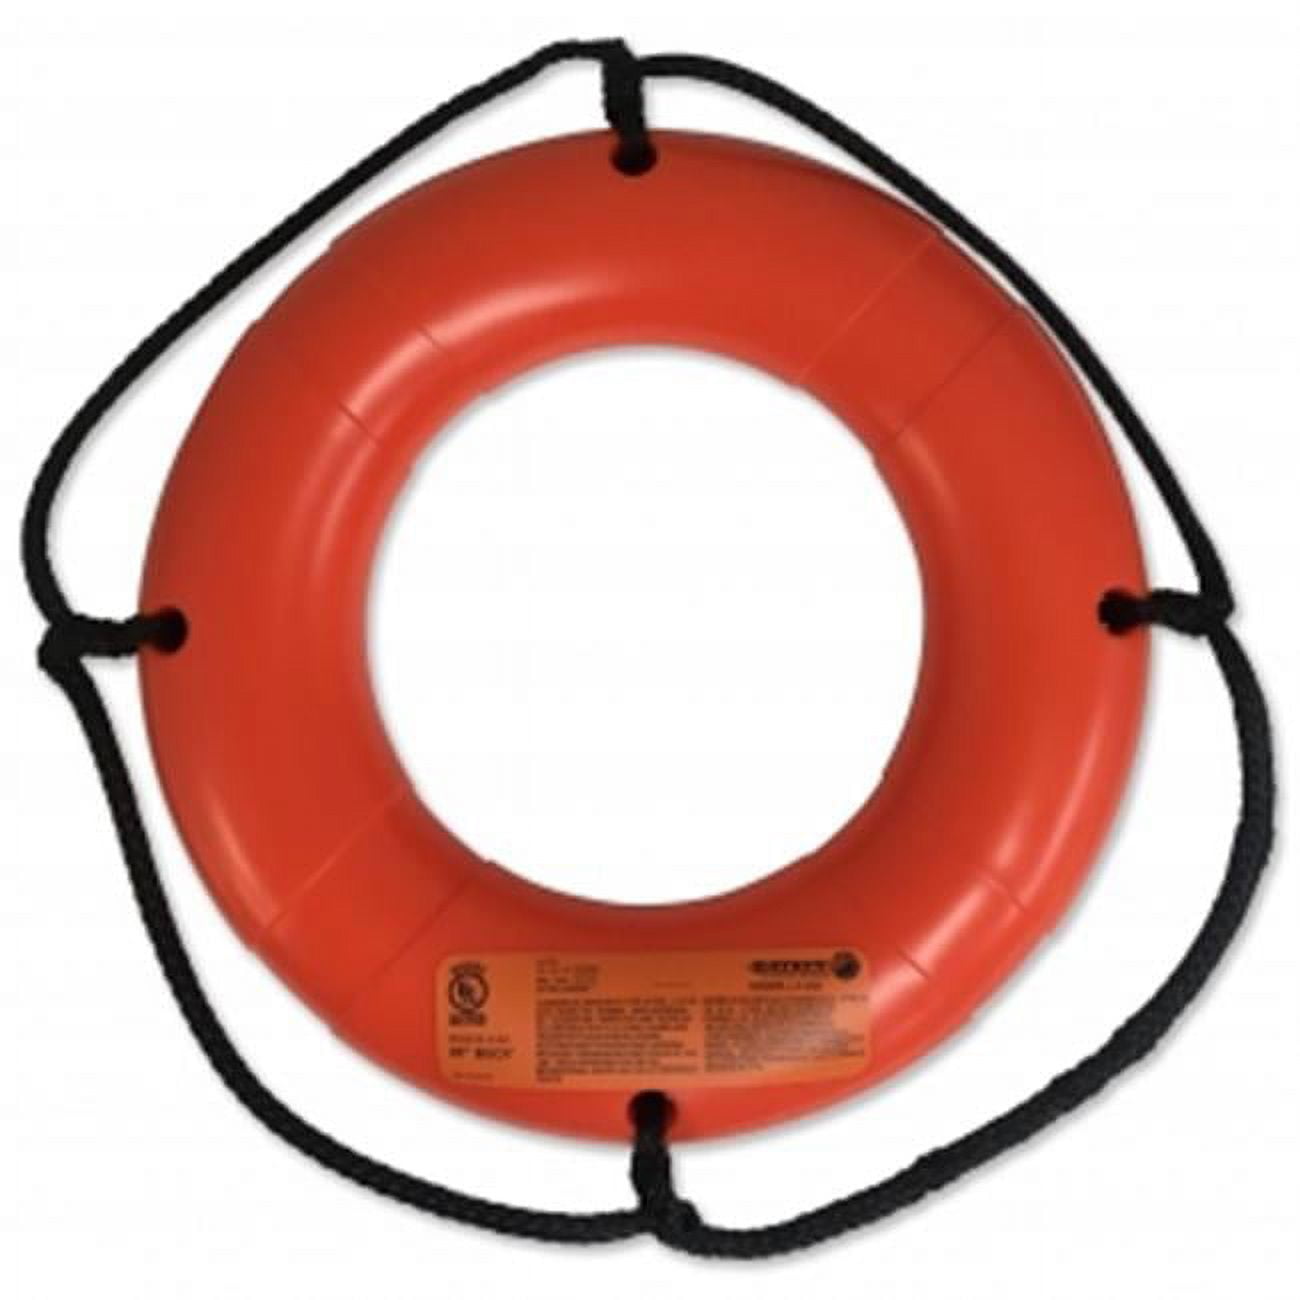 Picture of Datrex DX0200D 20 in. No Tape Lifering, Orange - USCG